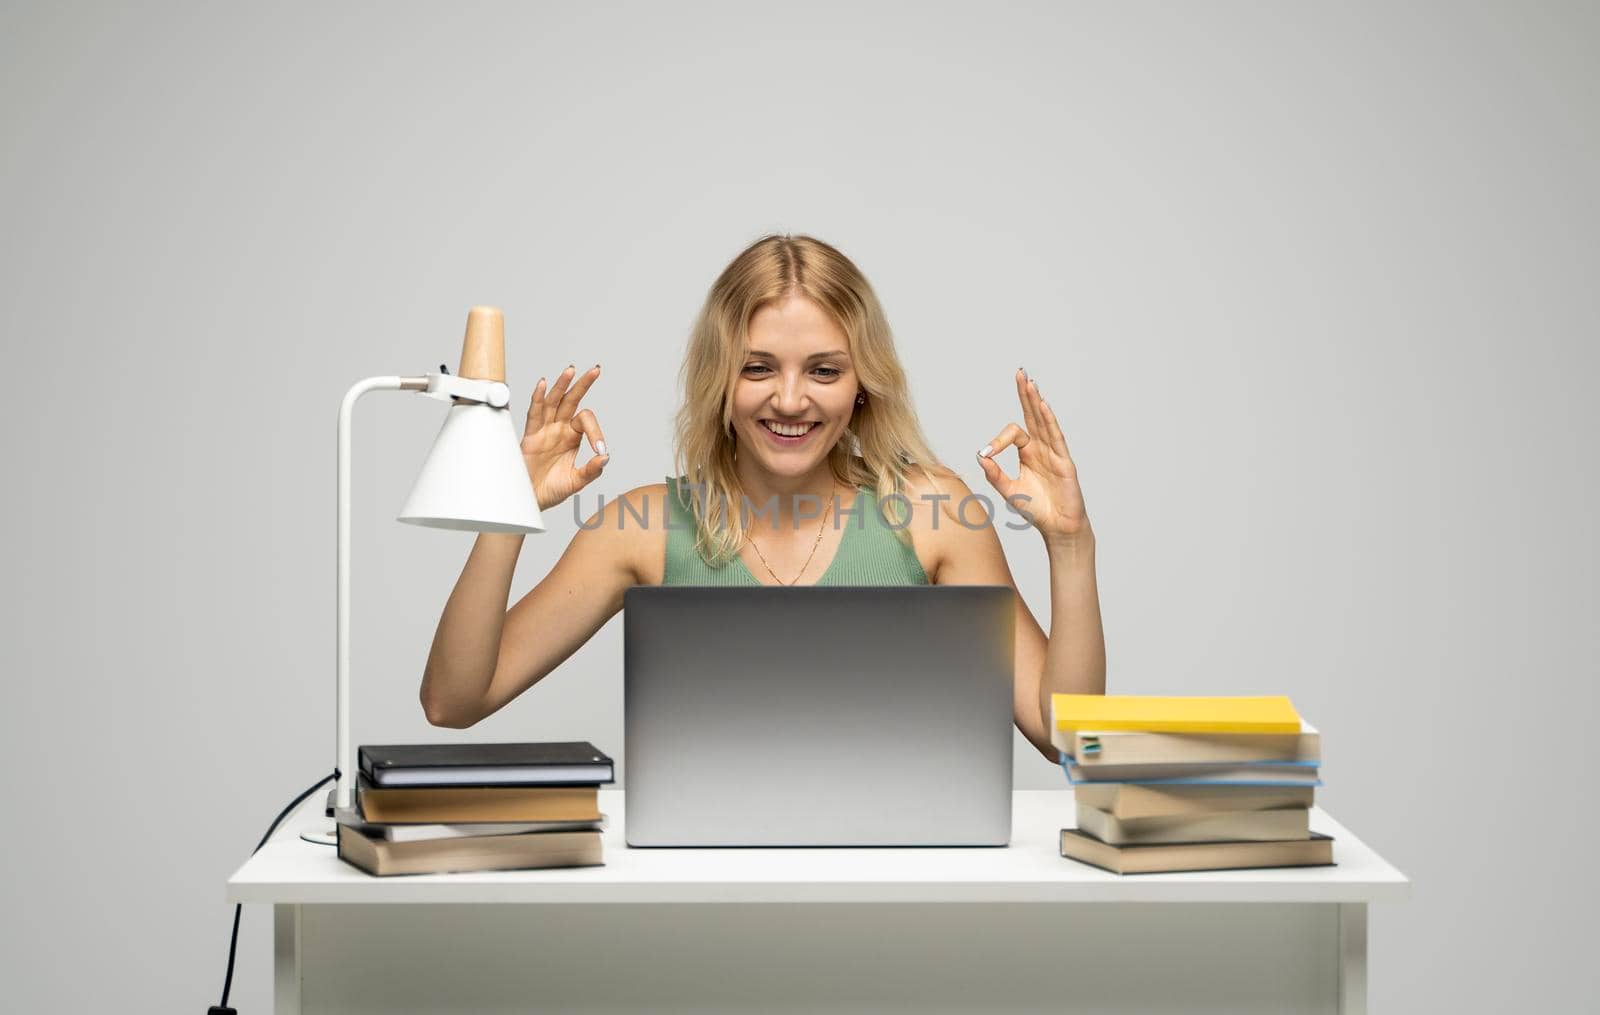 Student girl showing ok gesture with both hands, happy with completed work, smiling and looking at the camera while working on laptop computer sitting in front of big piles of books. by vovsht